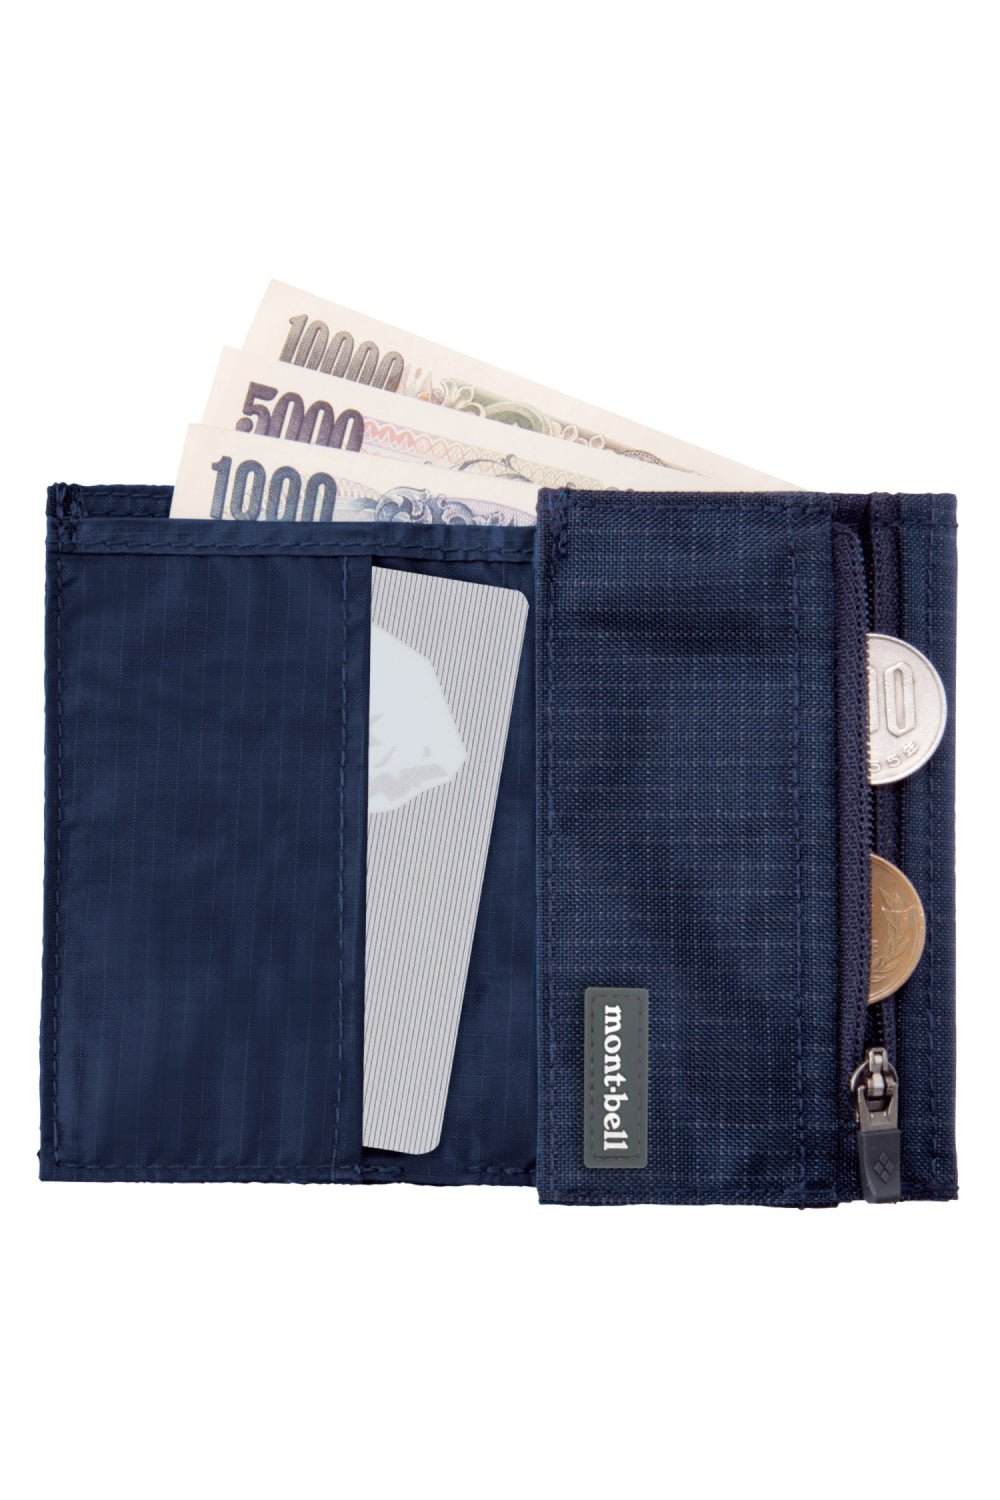 Montbell Trail Wallet - Dark Navy | Coffee Outdoors